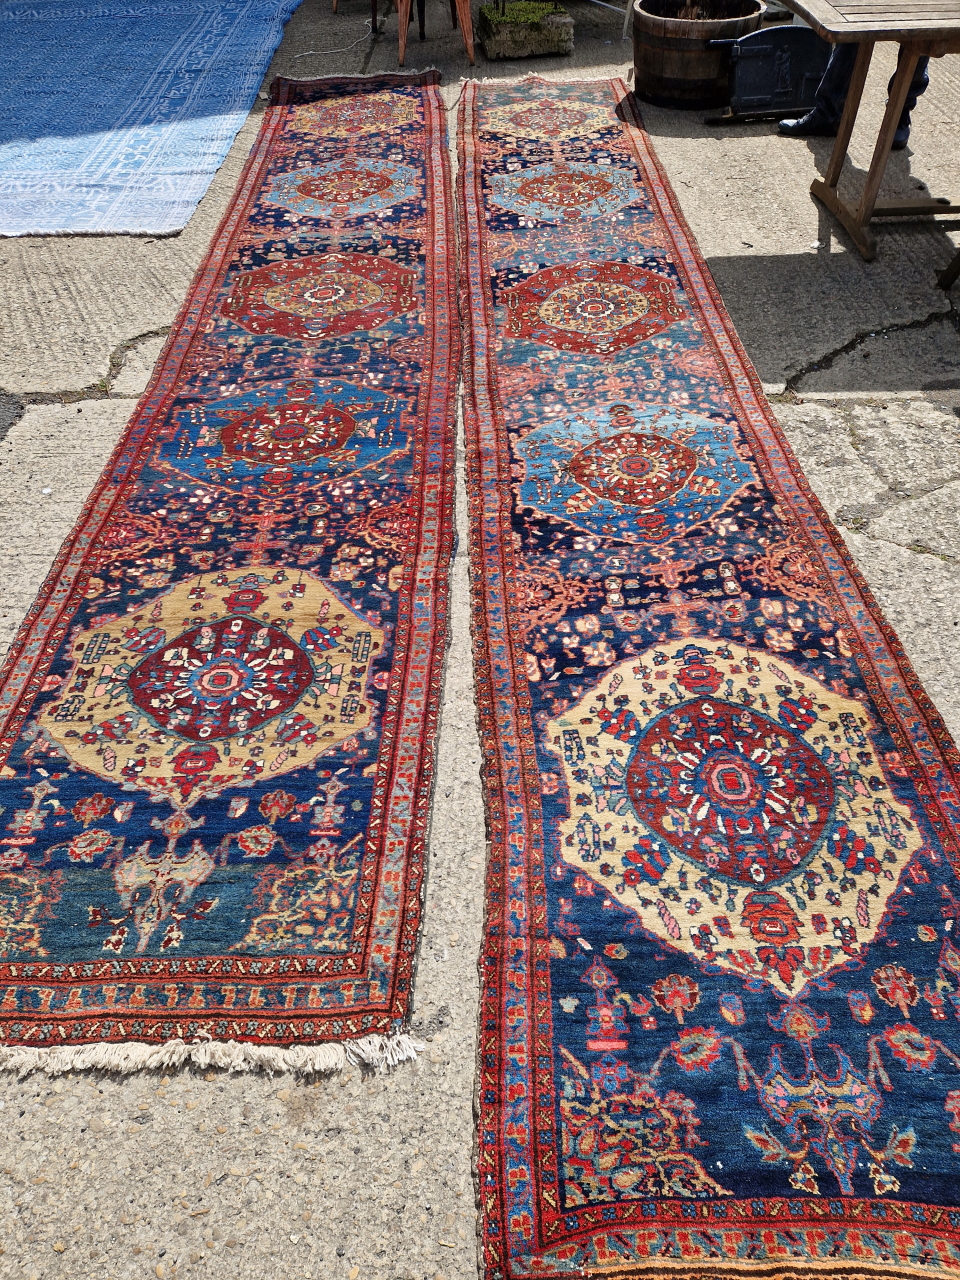 A NEAR PAIR OF PERSIAN TRIBAL COUNTRY HOUSE RUNNERS 530 x 94 cm AND 515 x 101 (2)